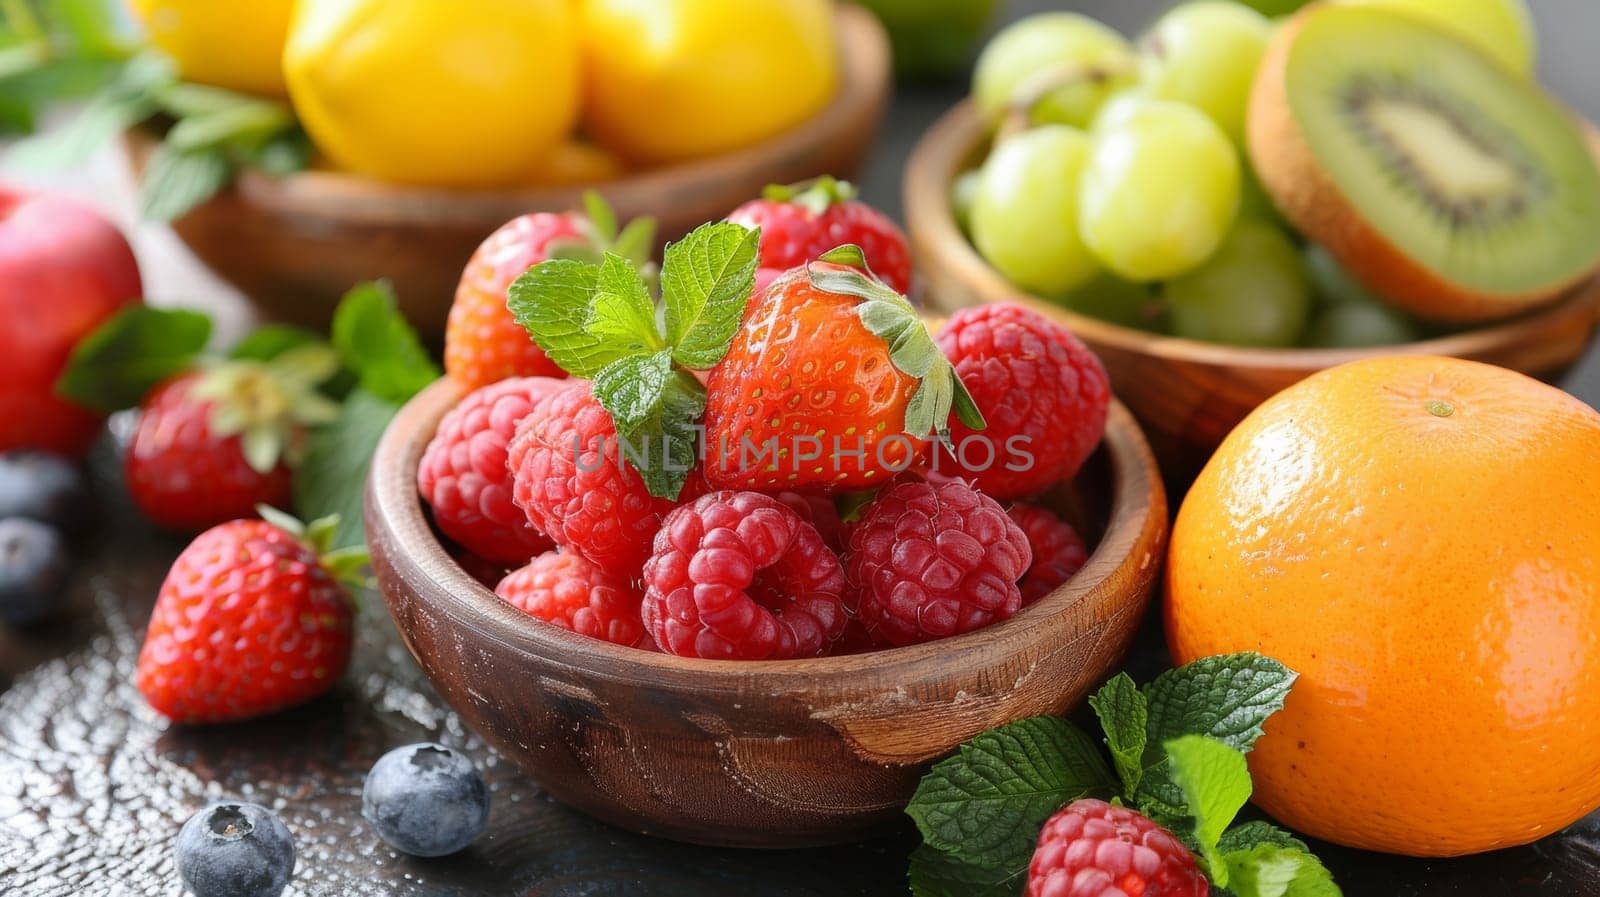 A table with bowls of fruit and a bowl full of berries, AI by starush